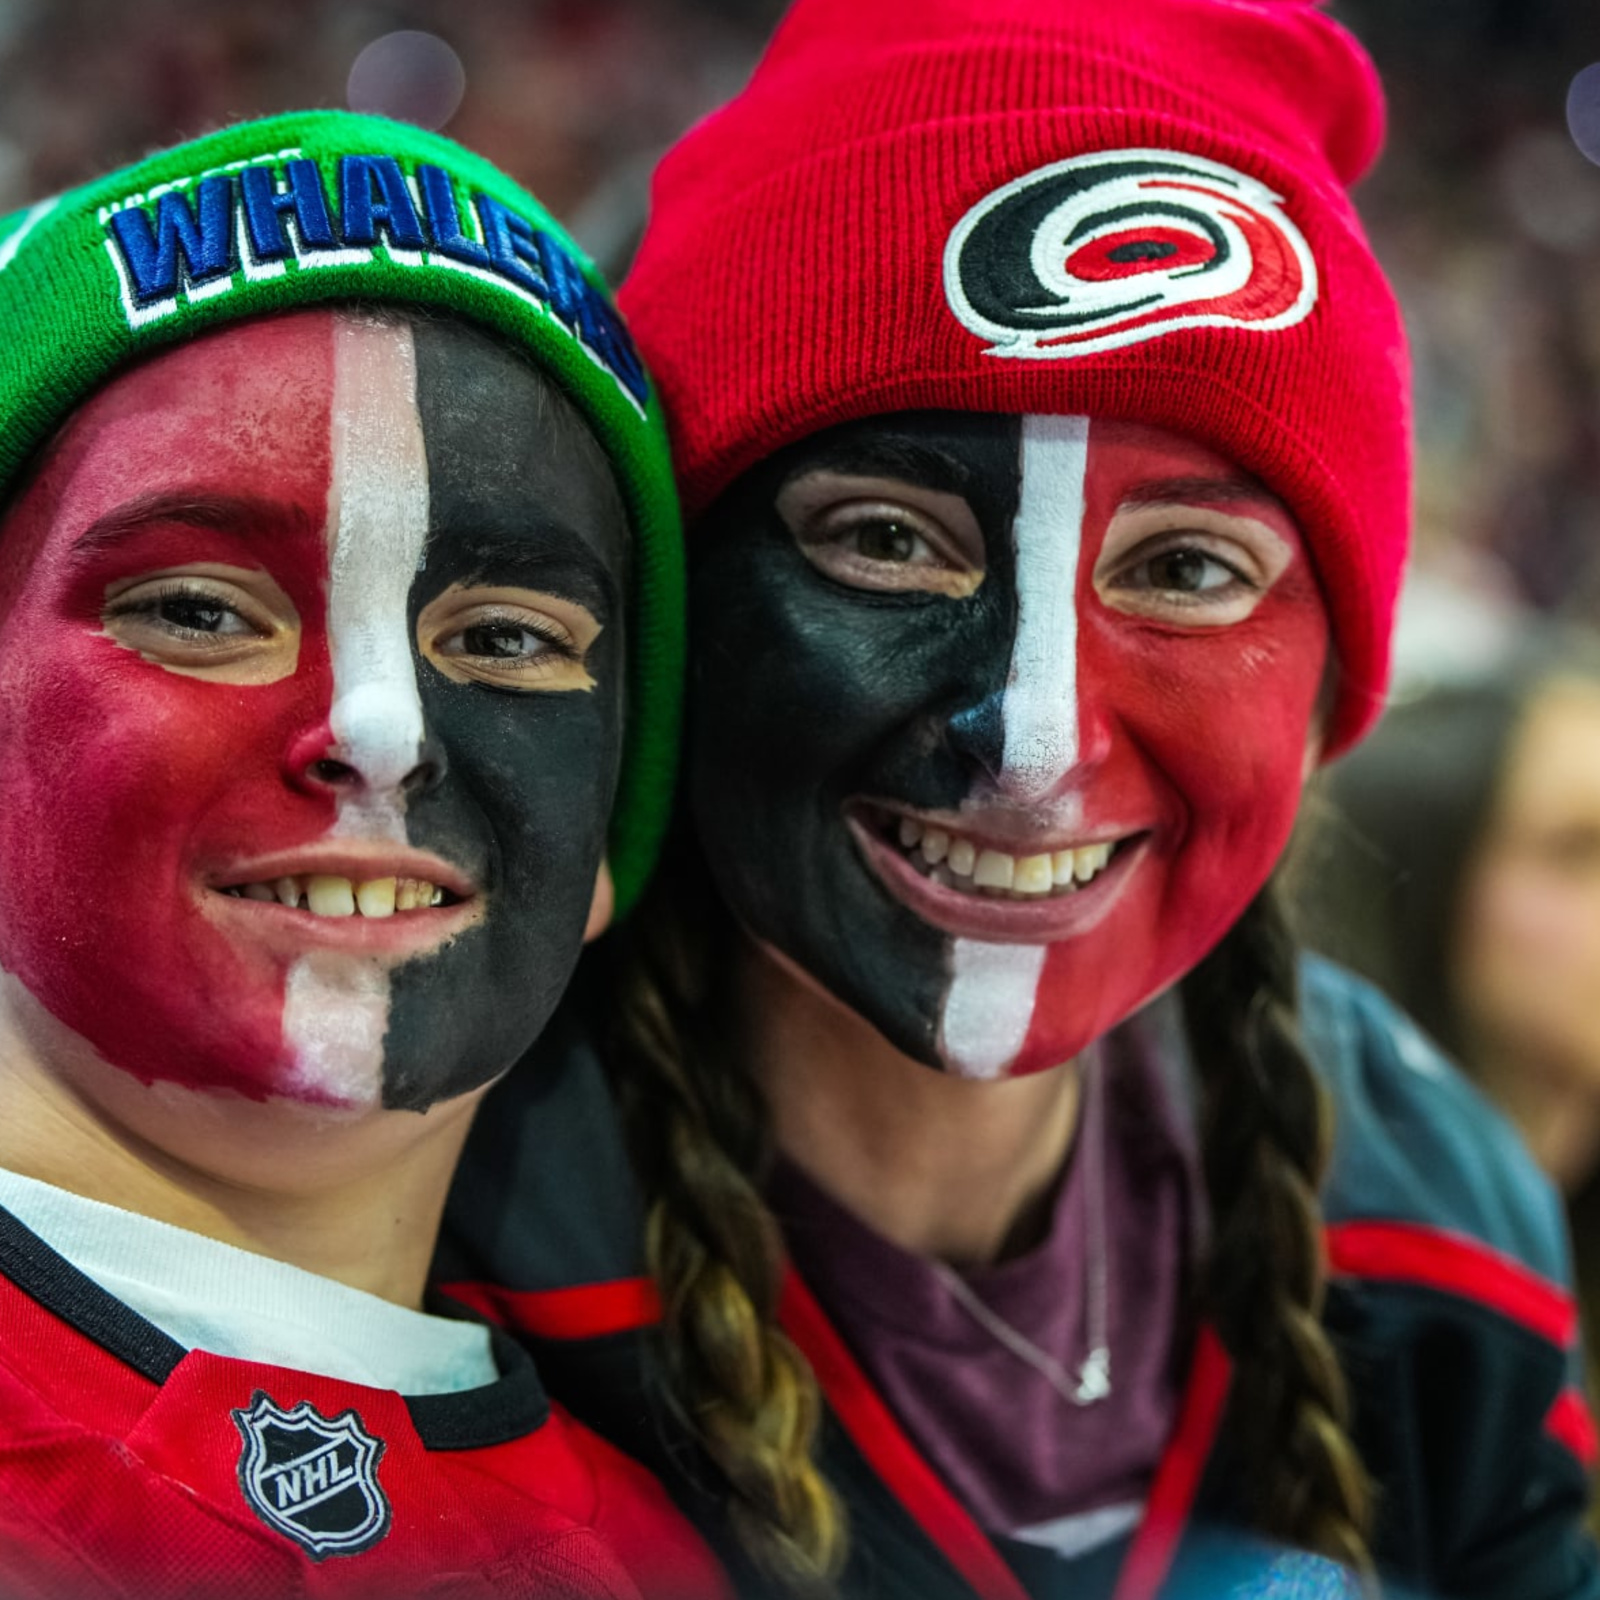 Carolina Hurricanes: The day that gave the franchise a face